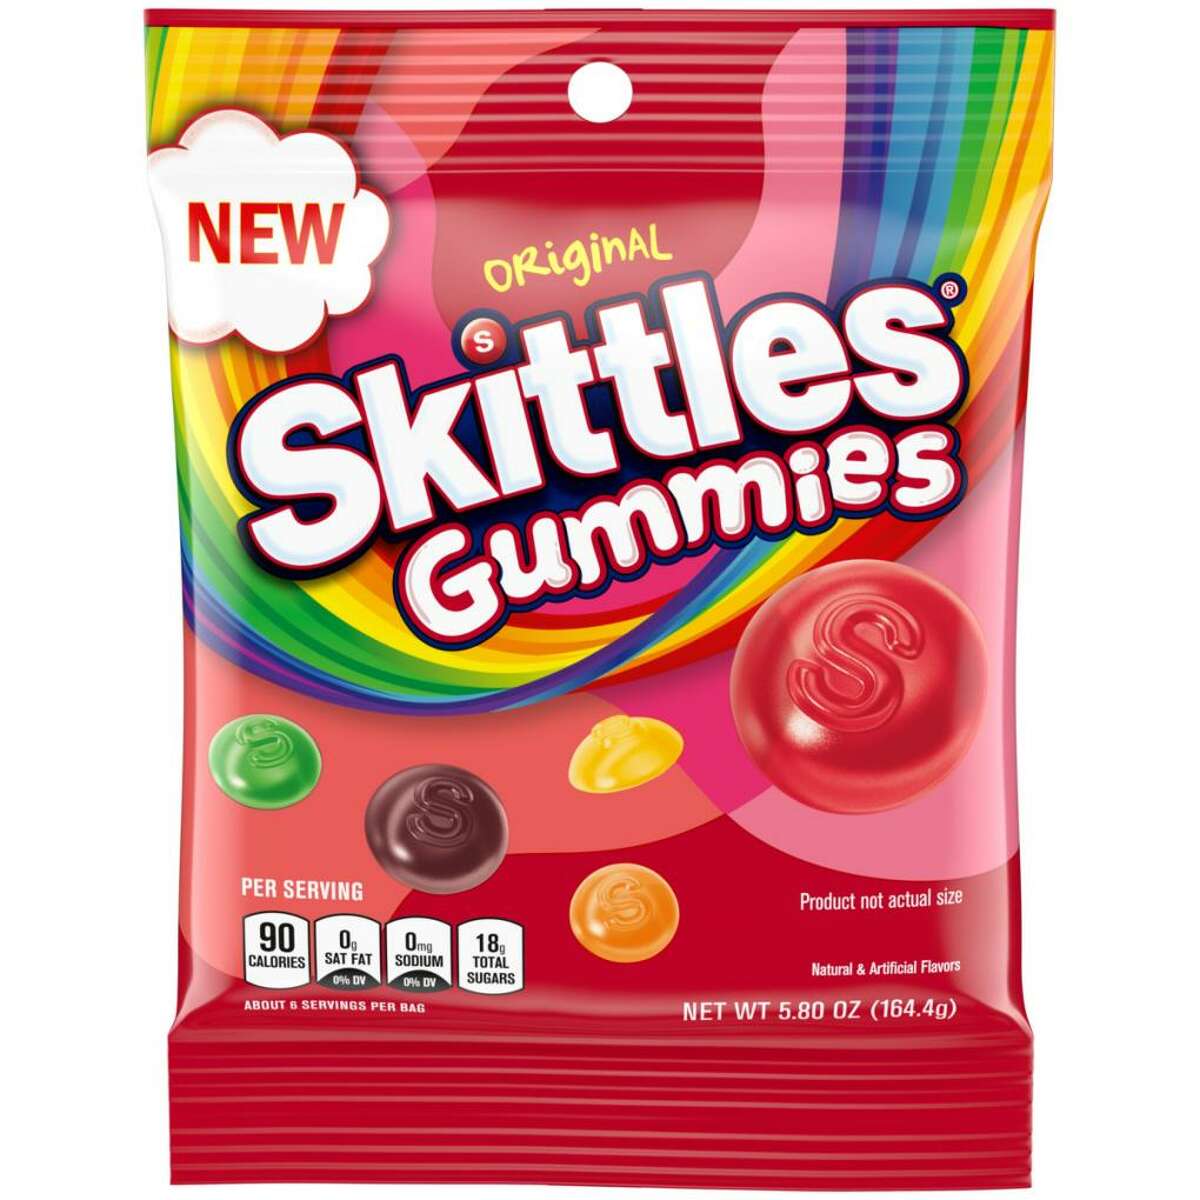 Candy giant Mars has issued a recall of certain gummy varieties of its Starburst, Life Savers and Skittles candies on May 17, 2022